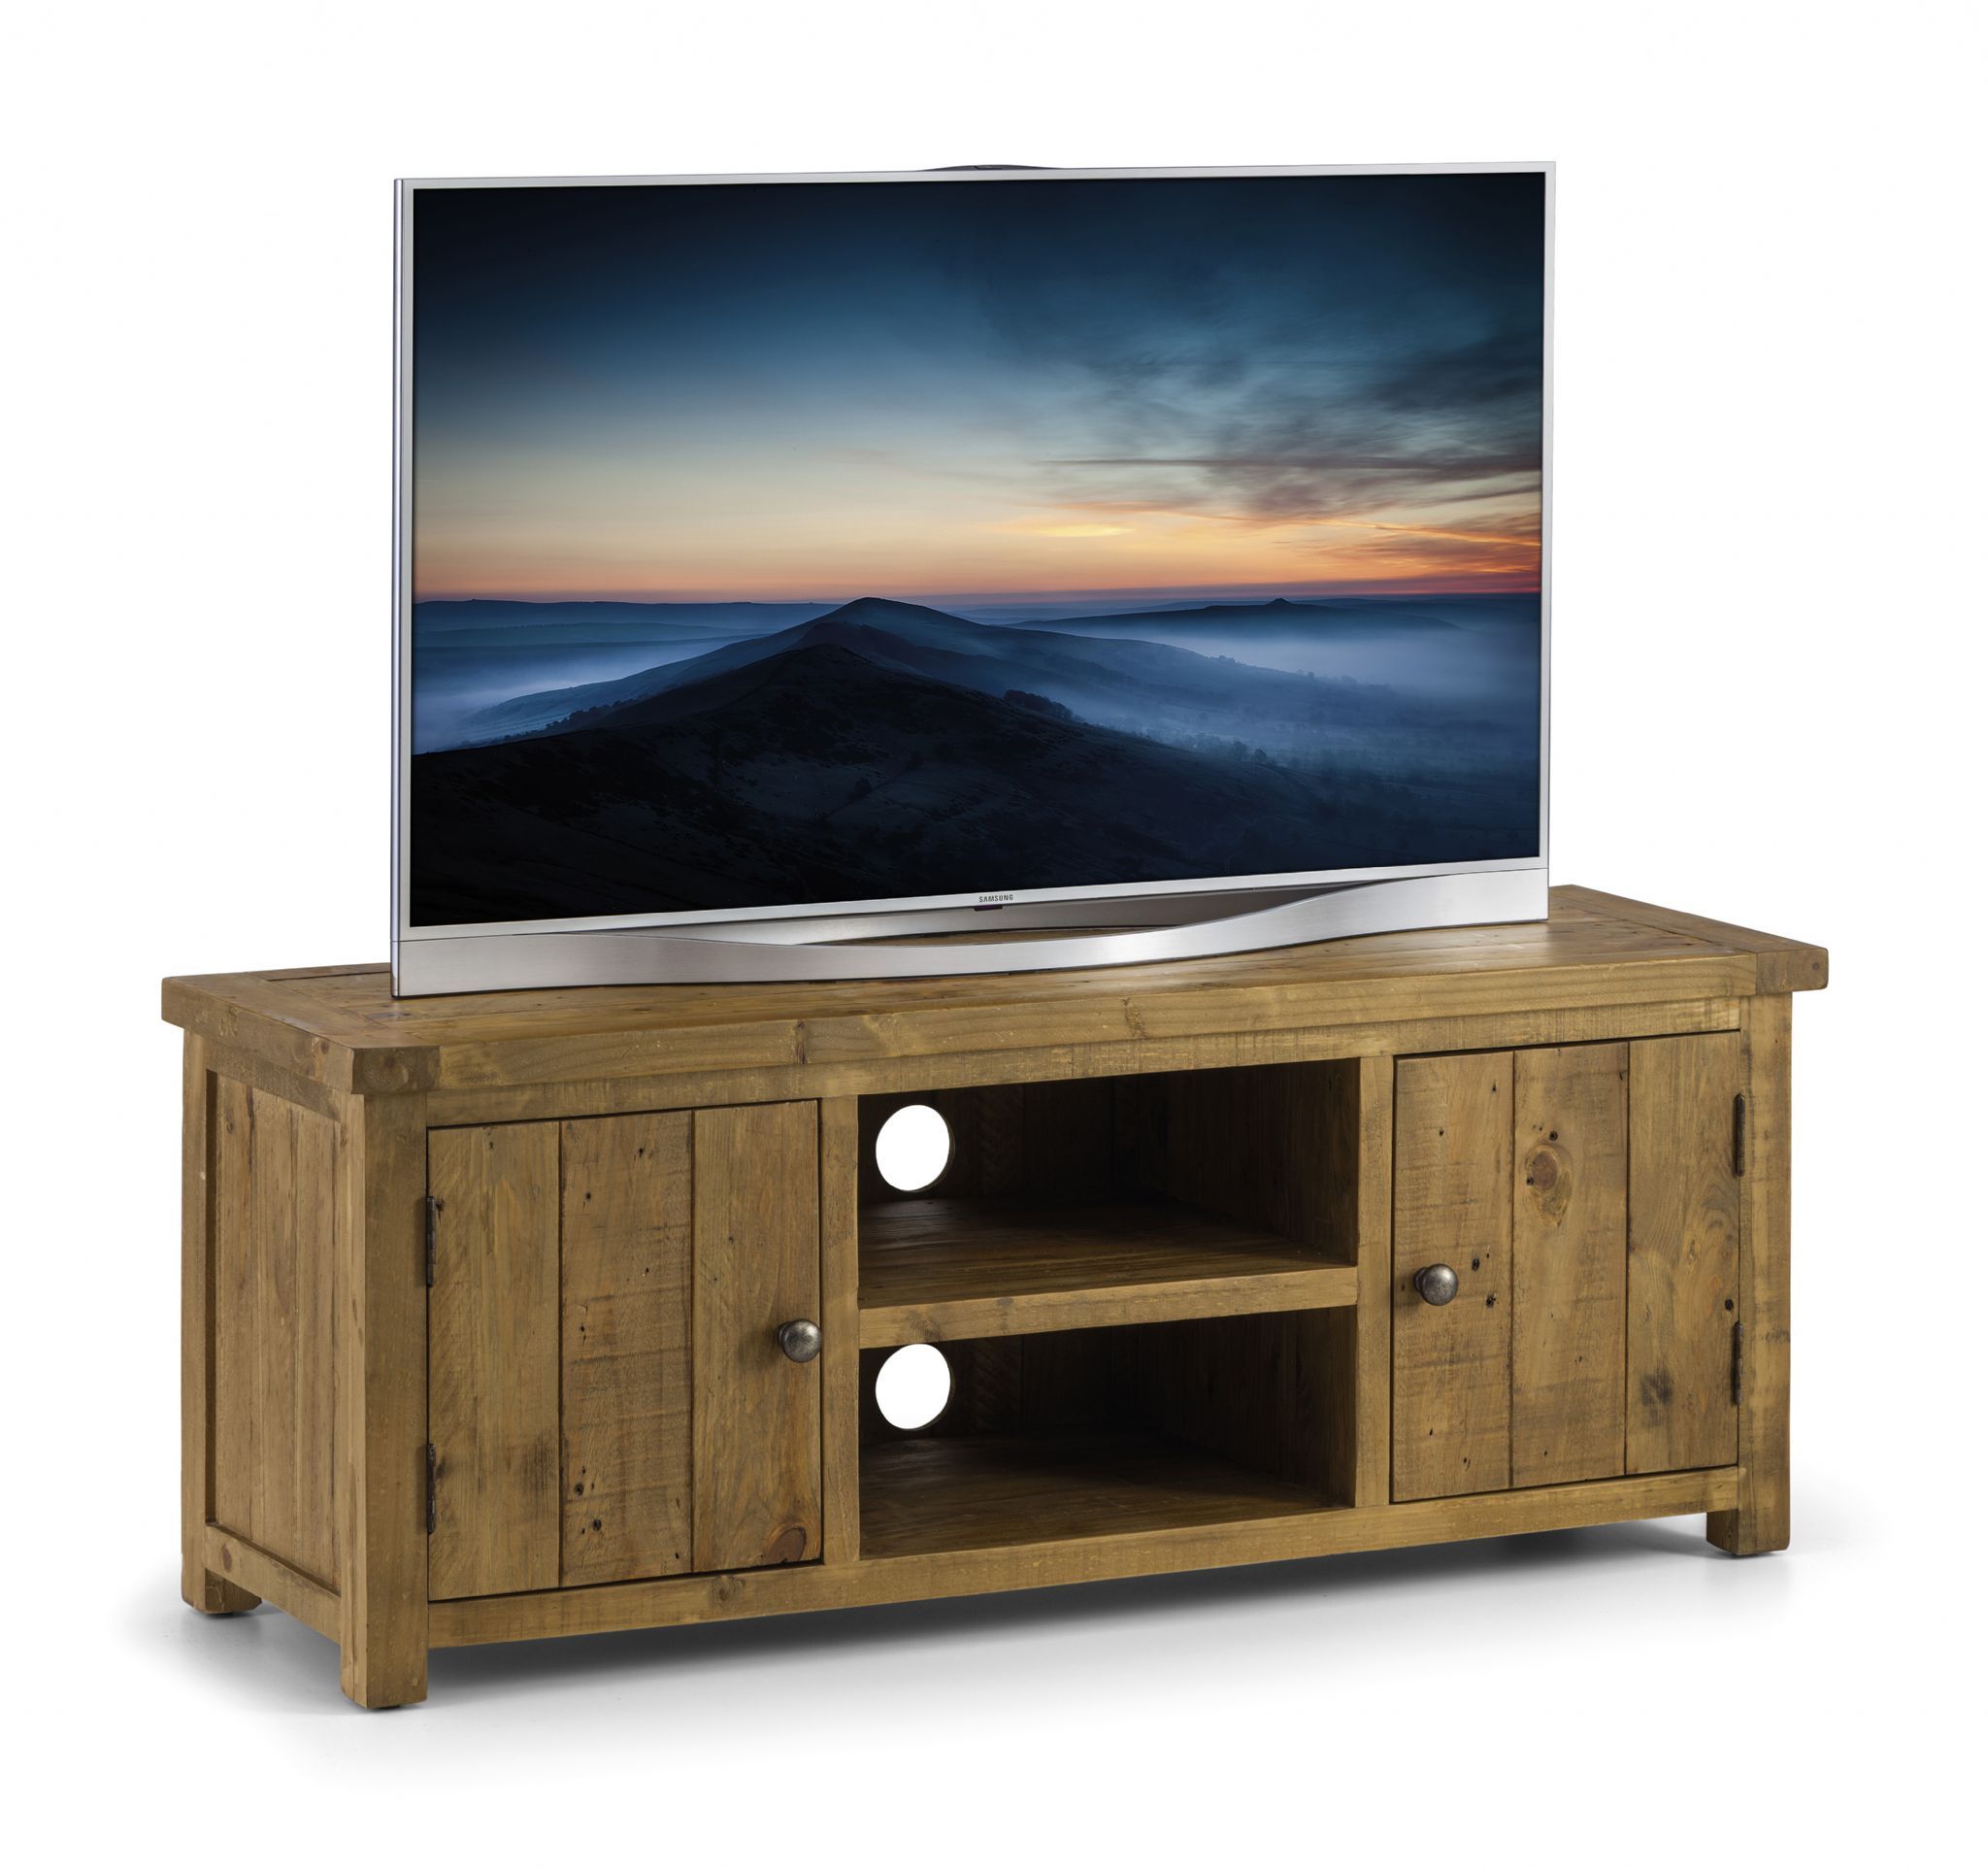 Cordoba Solid Reclaimed Pine Large Widescreen Tv Unit Jb42 Throughout Cordoba Tv Stands (View 2 of 15)